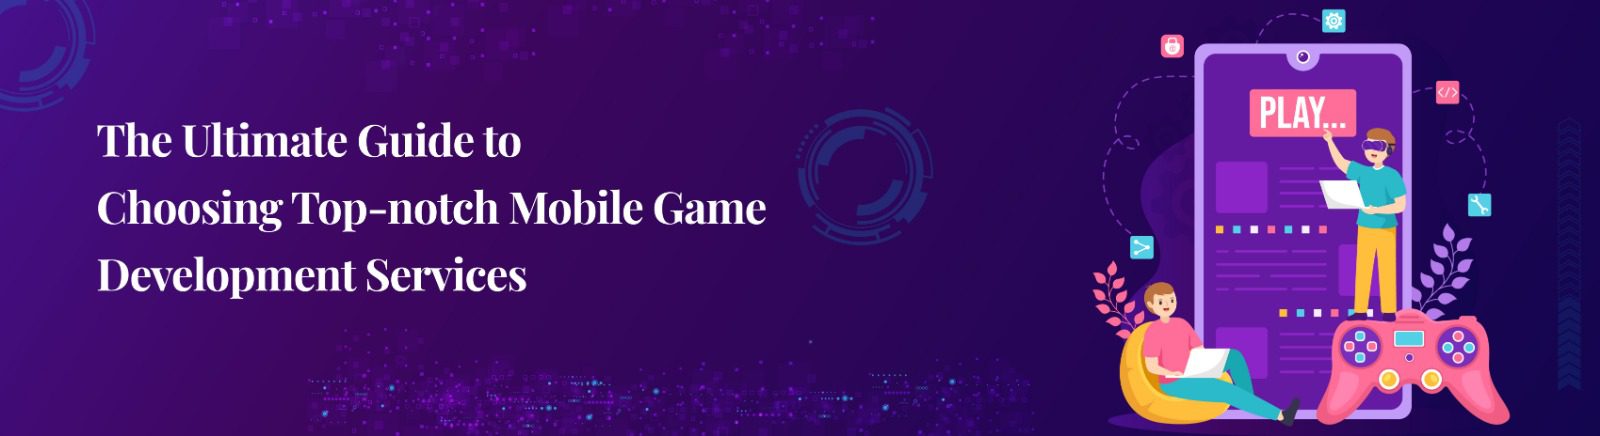 The Ultimate Guide to Choosing Top-notch Mobile Game Development Services